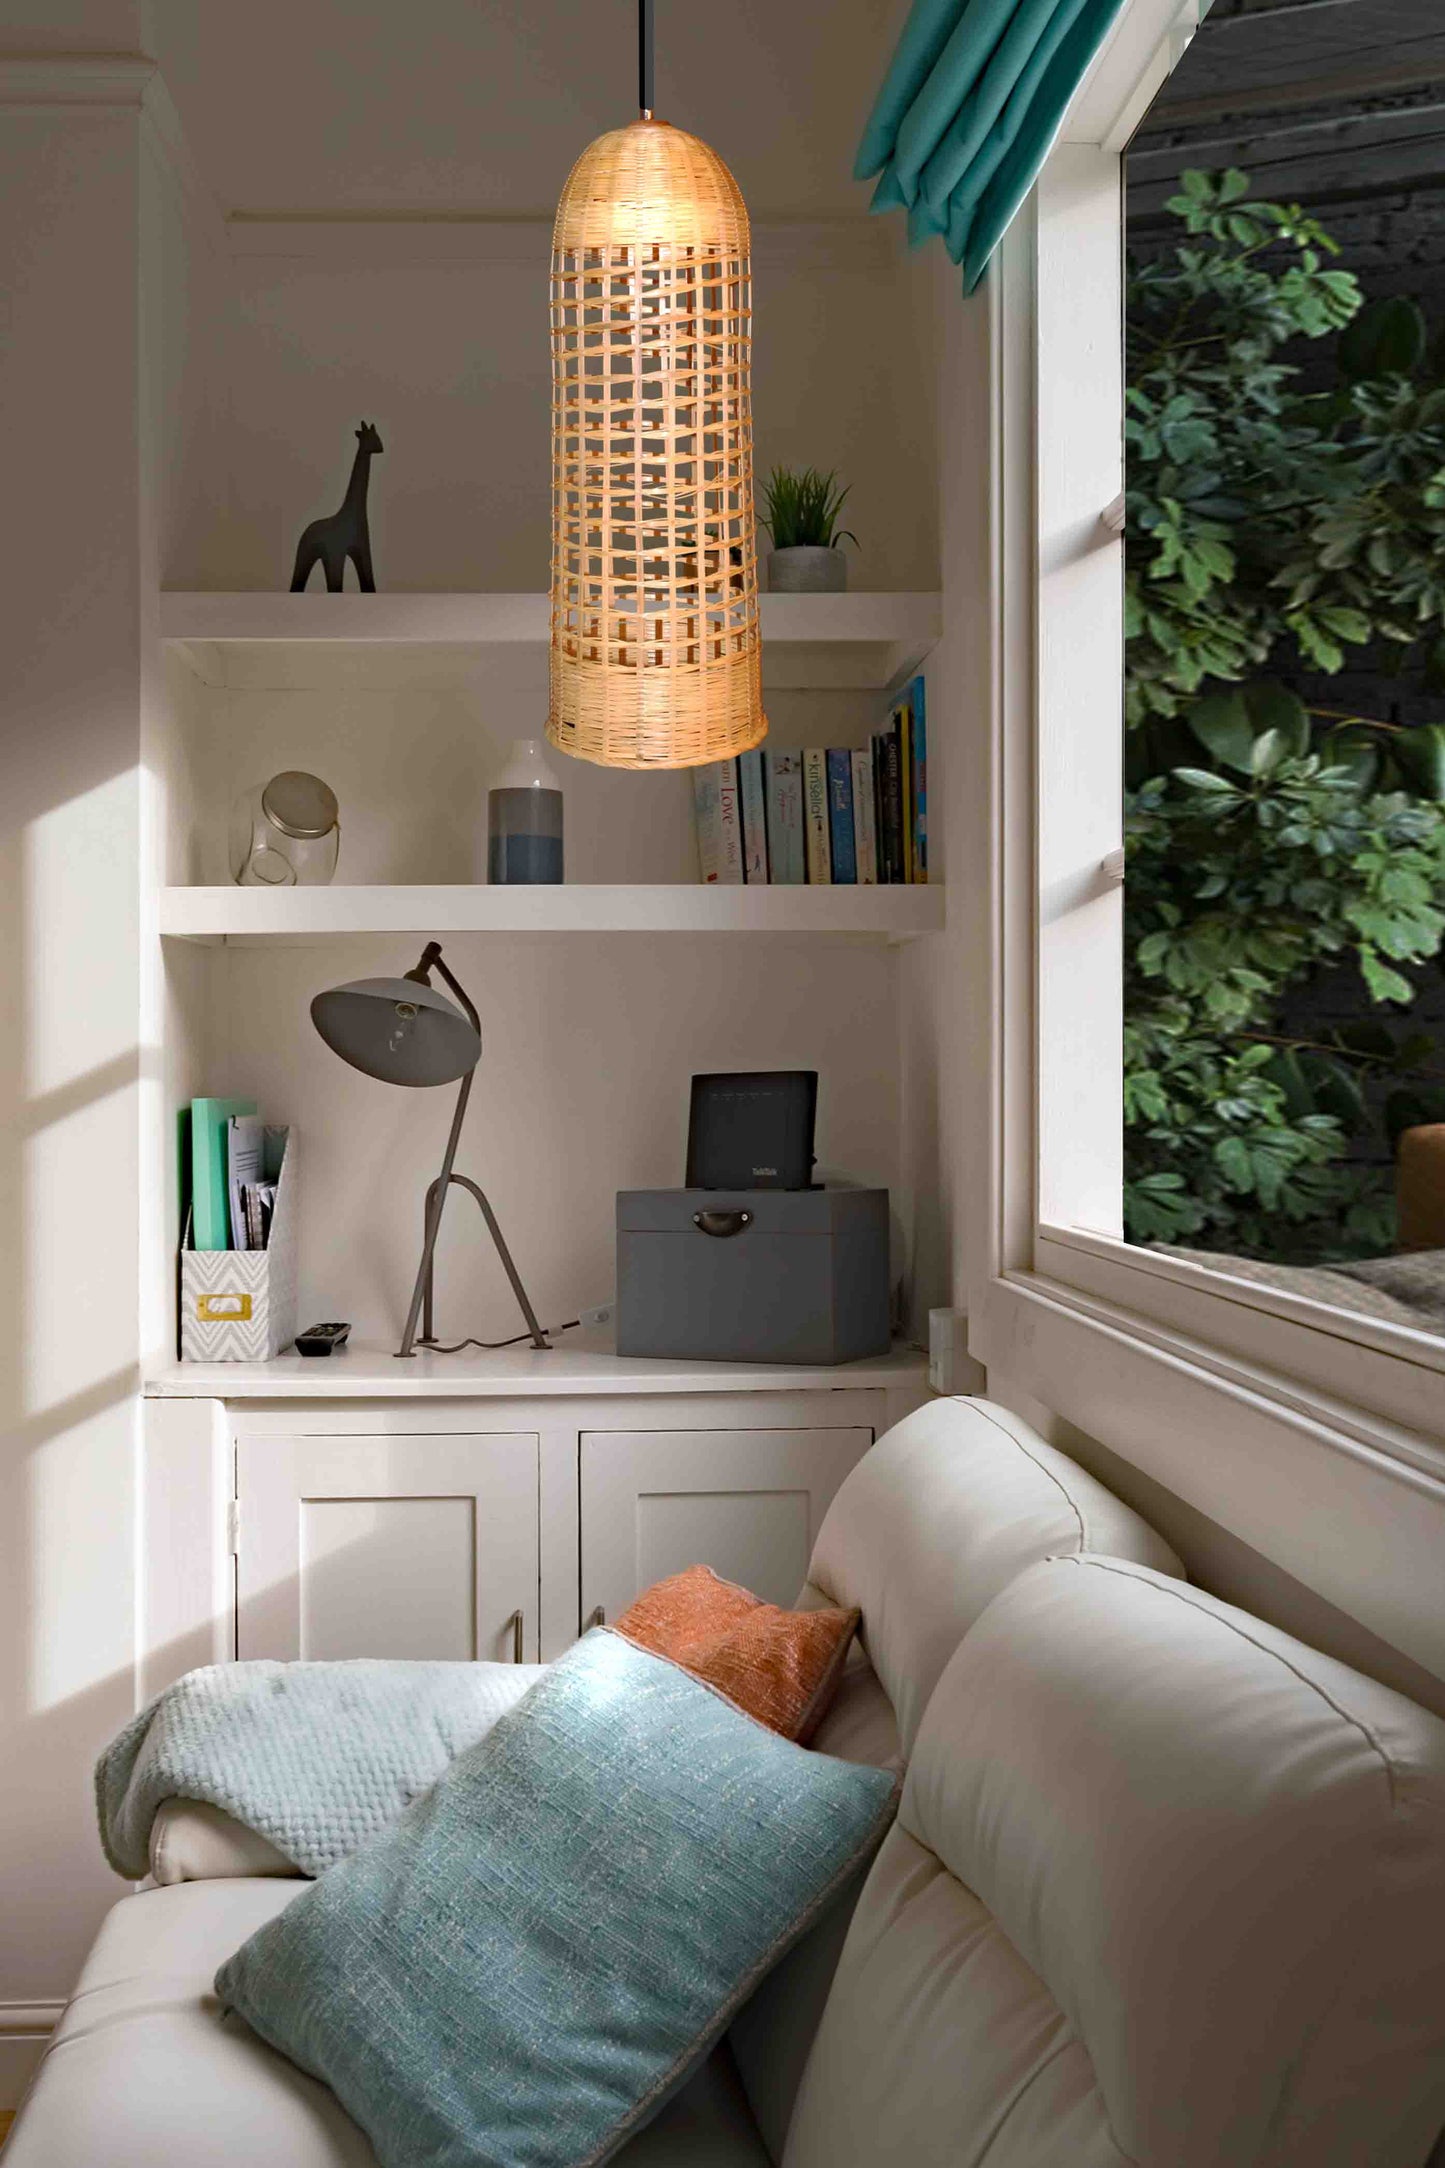 Bamboo Hand-Woven Cylinder Pendant Light By Artisan Living -Only Small Size Available-5